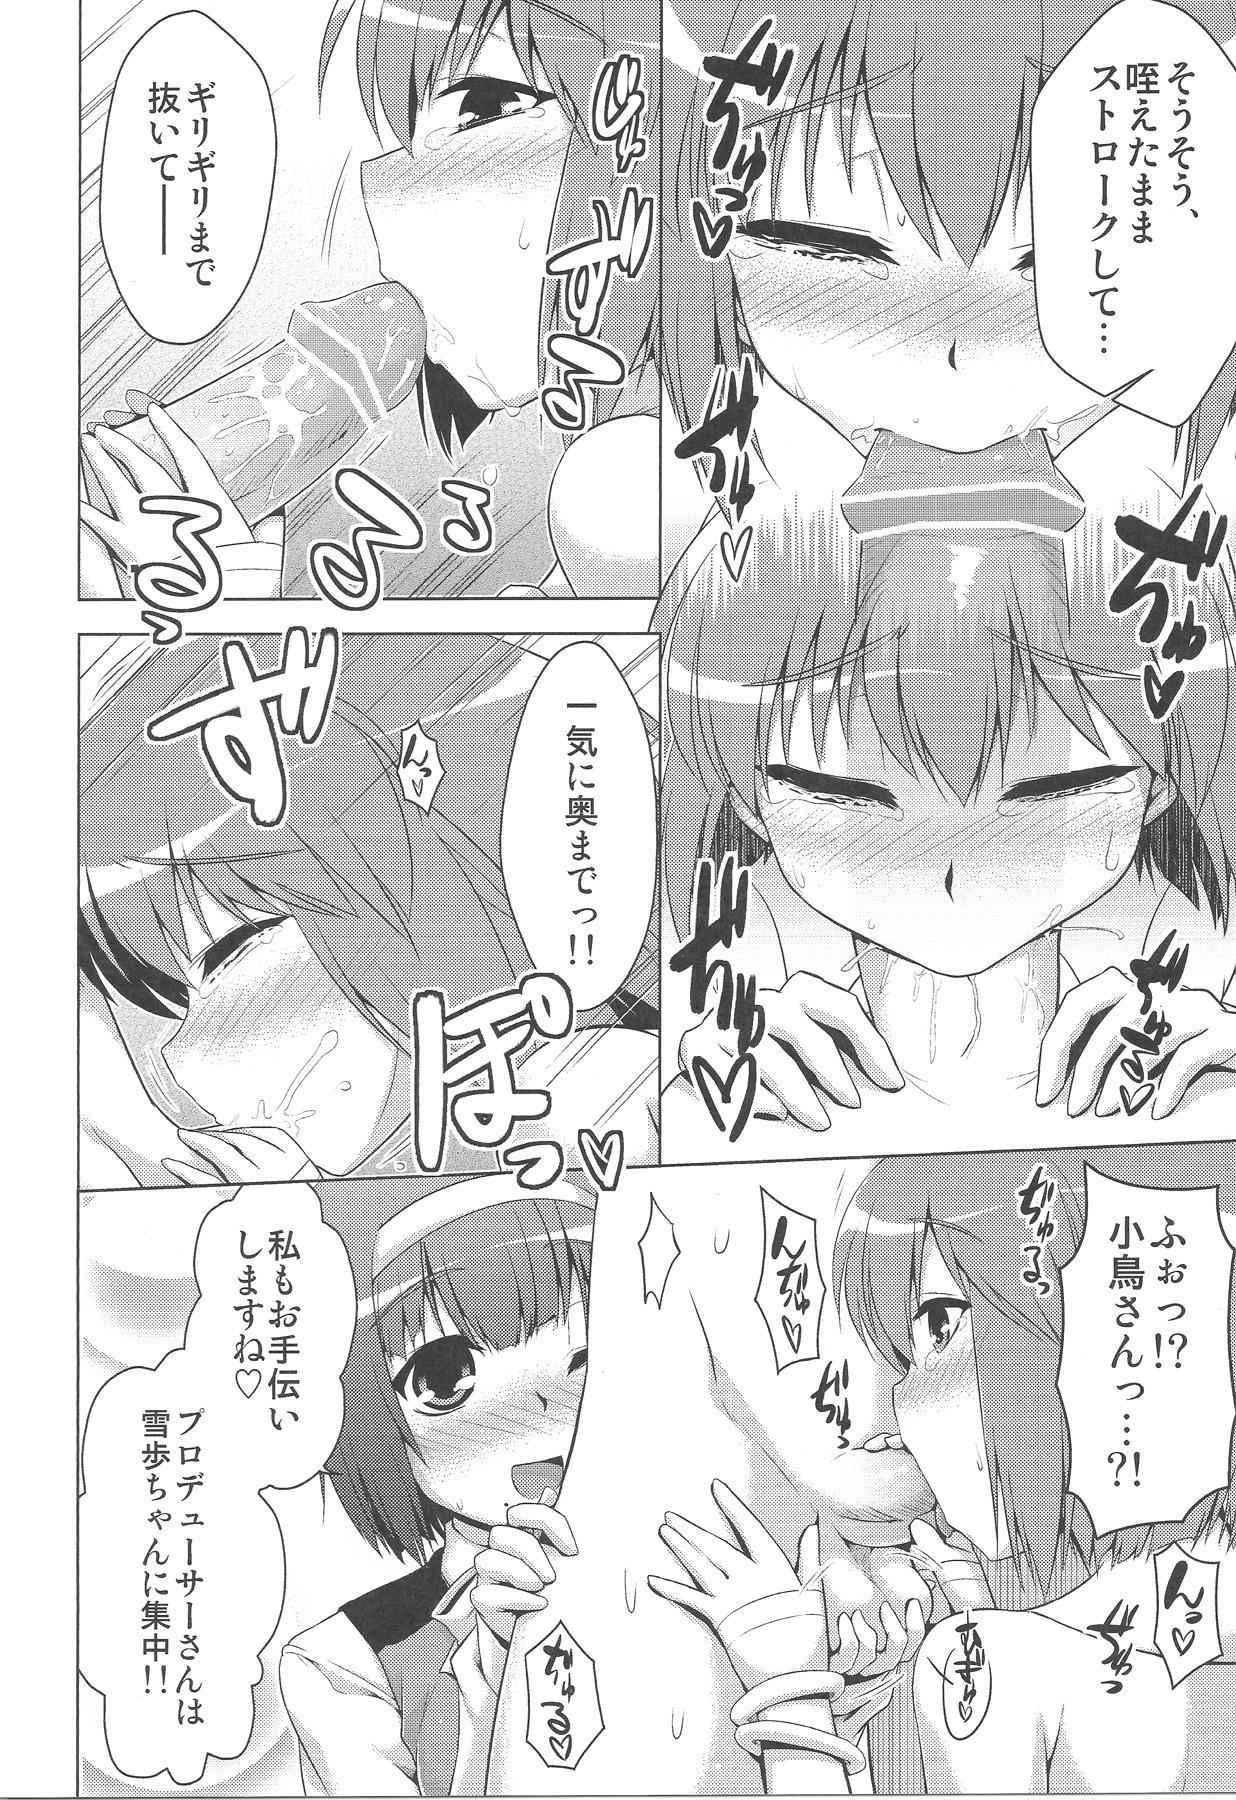 Amante Futari no Burst Appeal - The idolmaster Sissy - Page 4